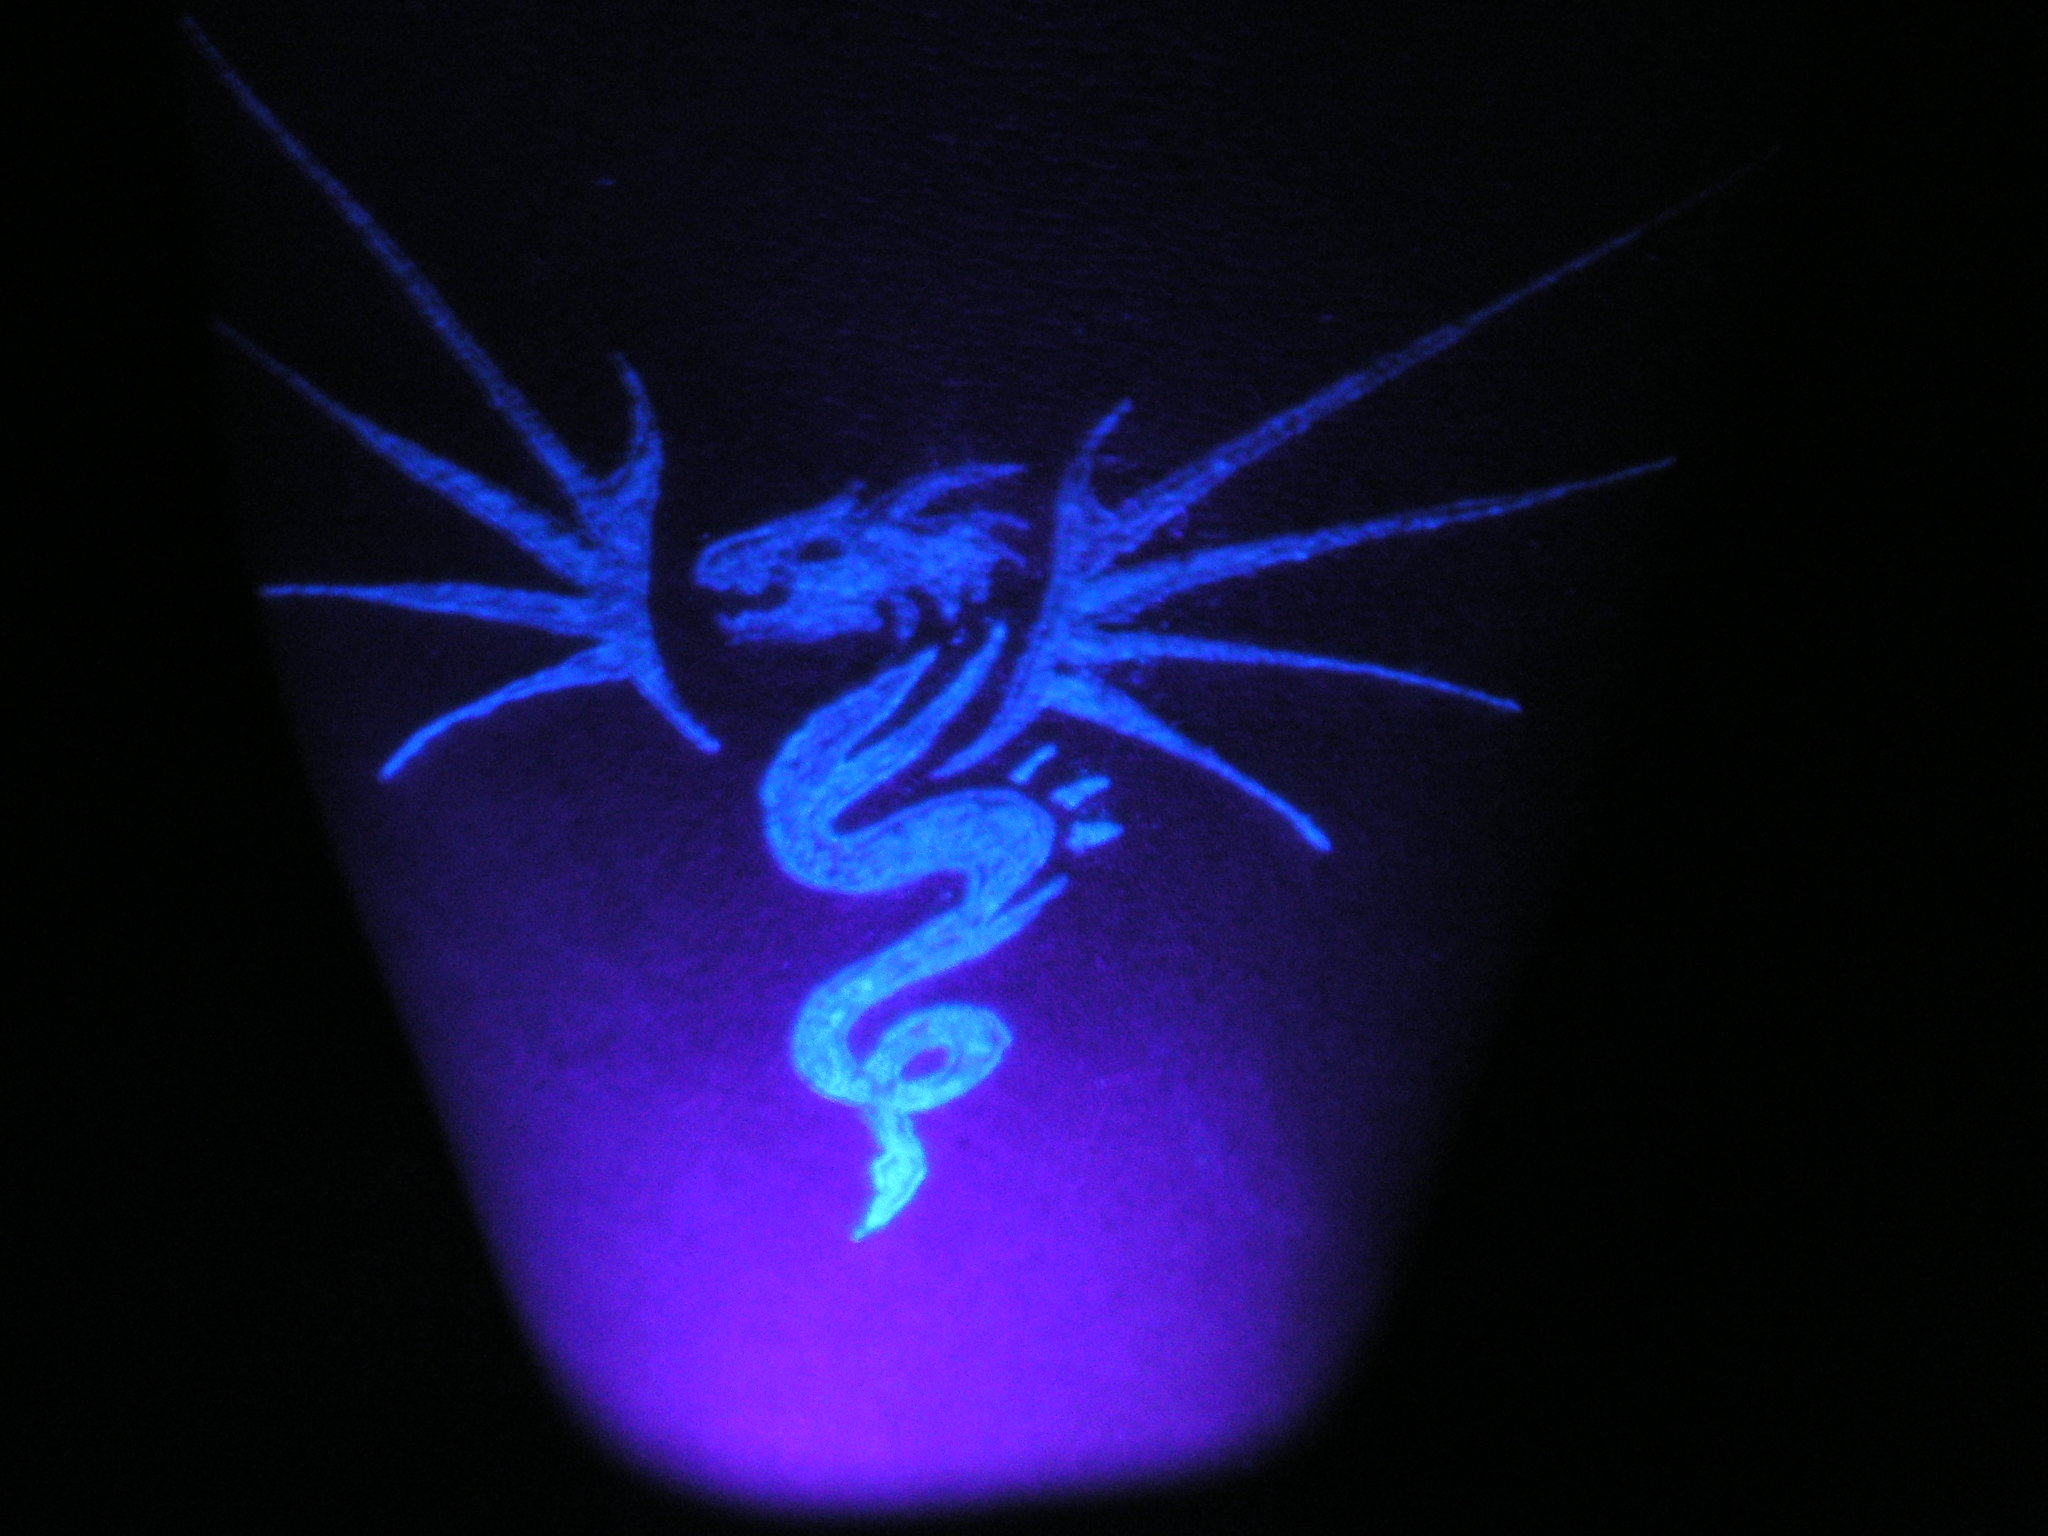 Tattoo Artist Uses Ink That Reacts To UV Light